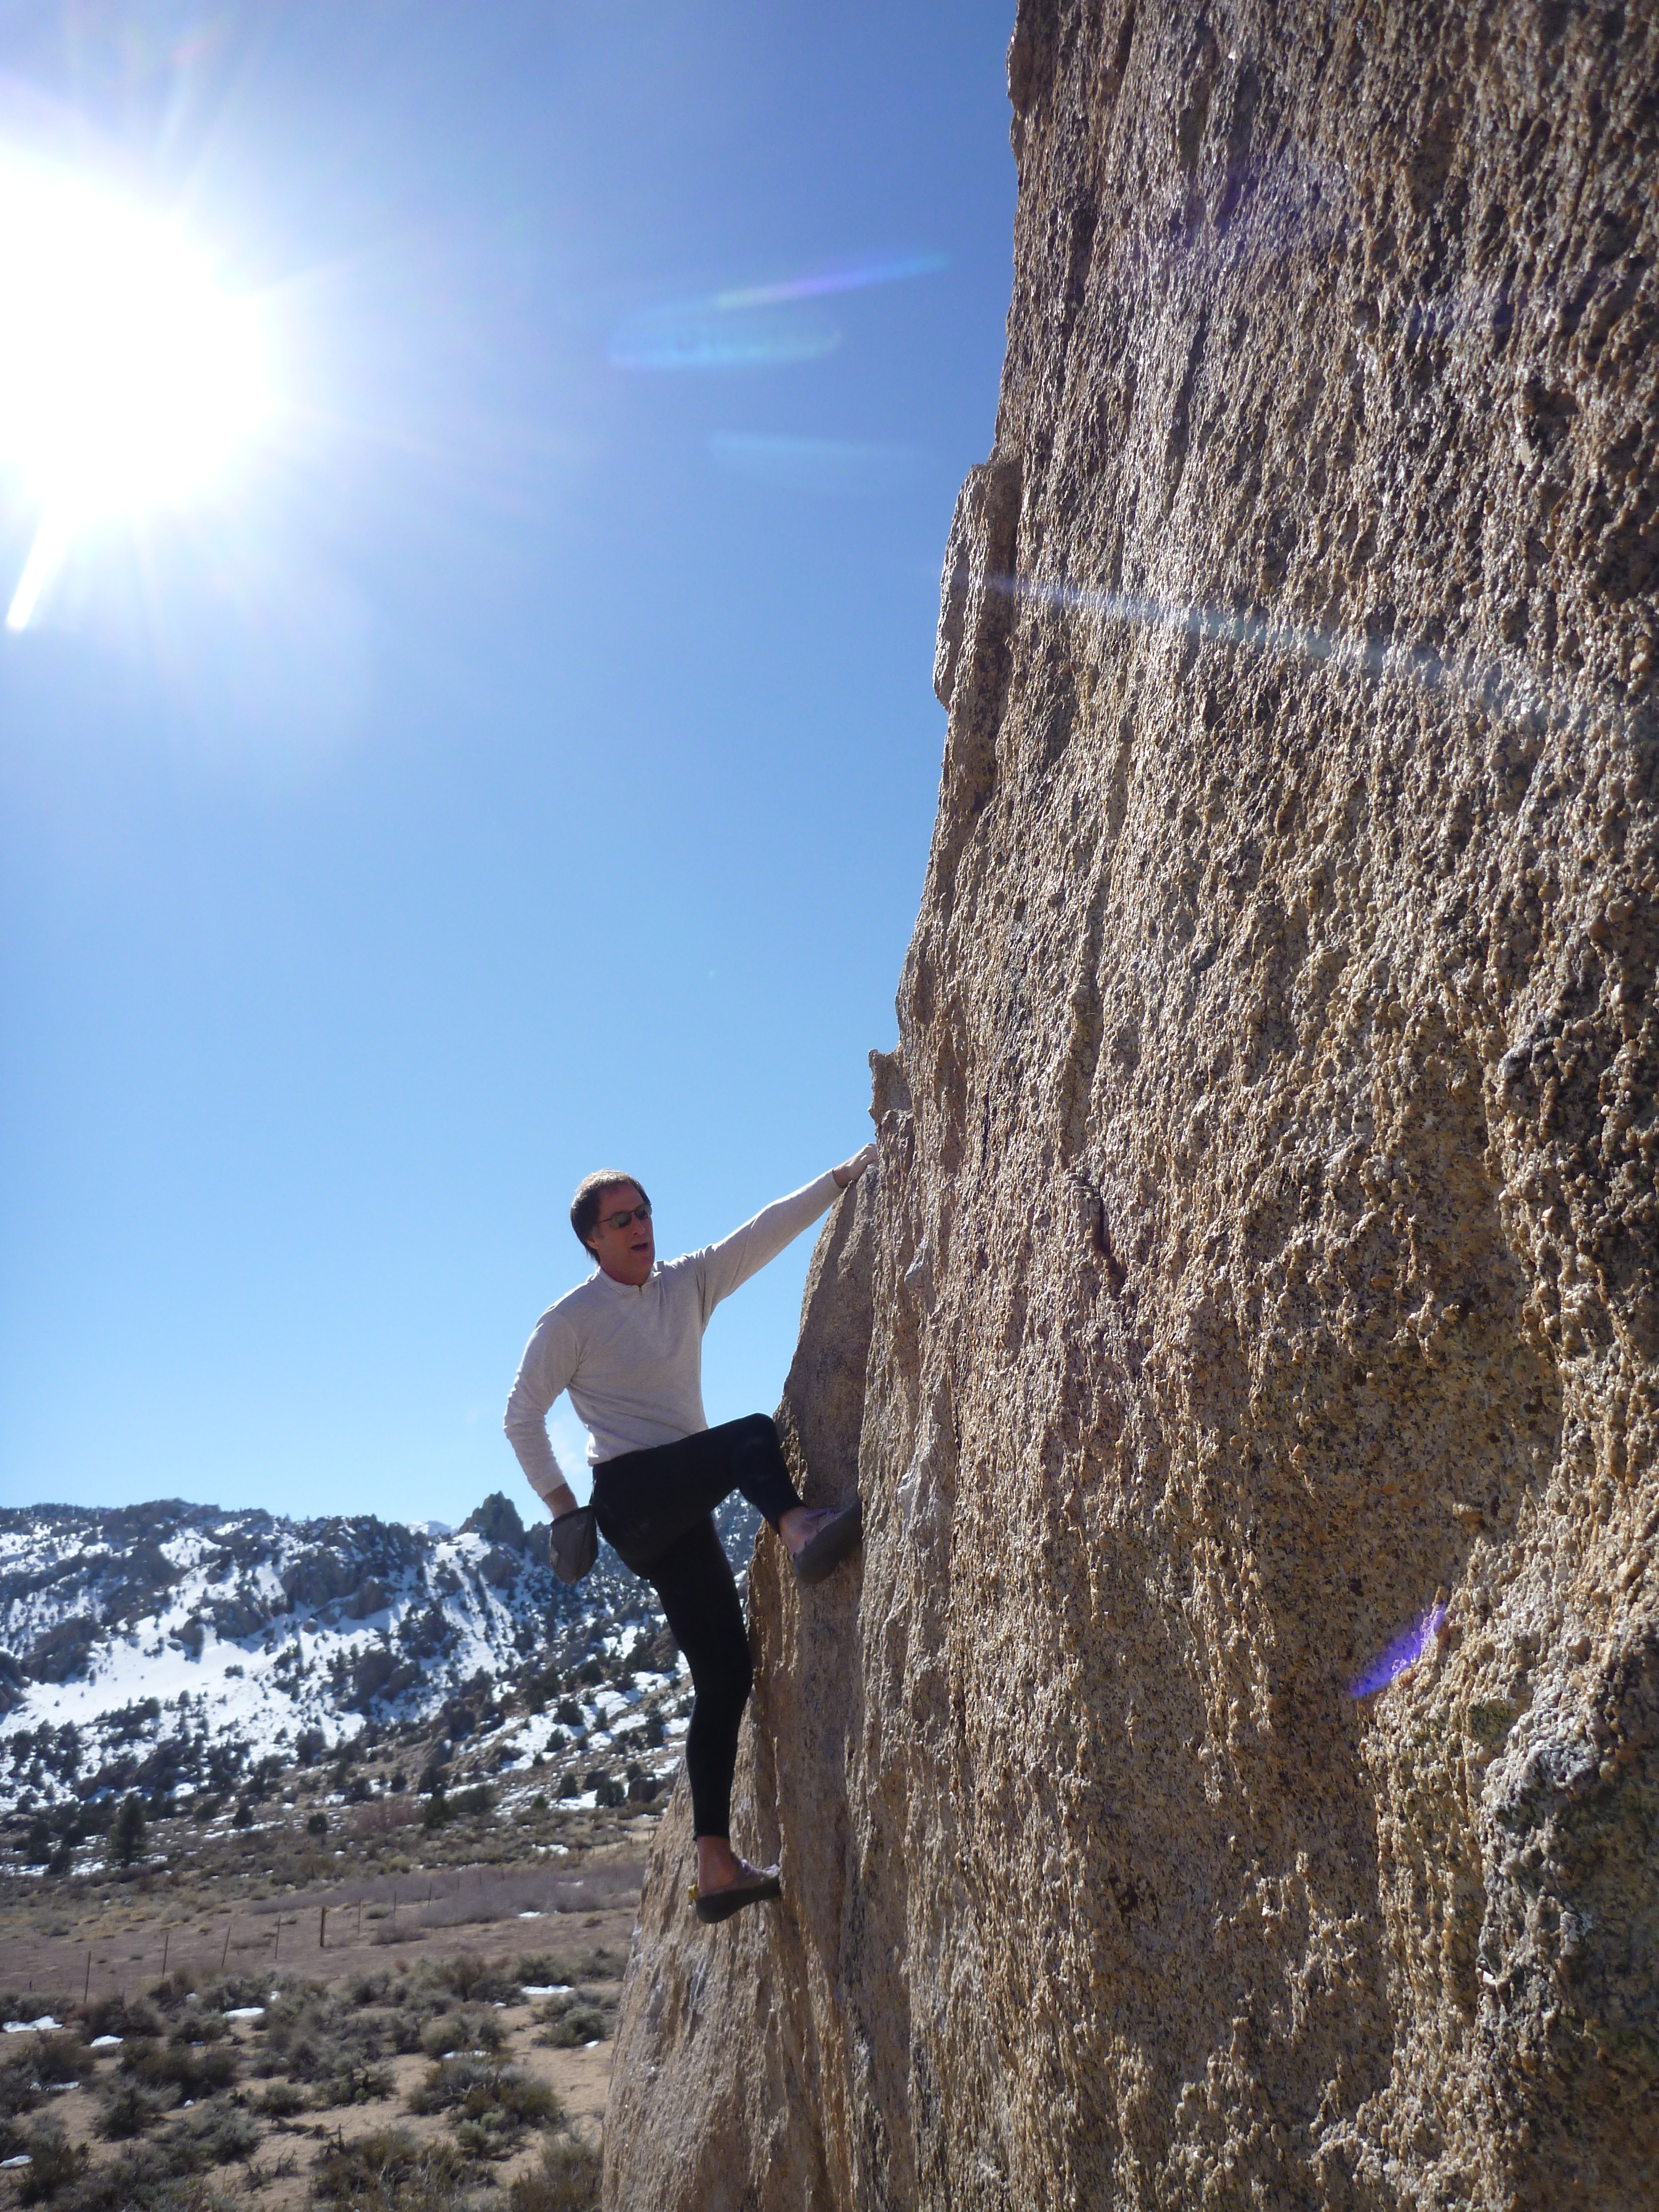 Bouldering at the Buttermilks